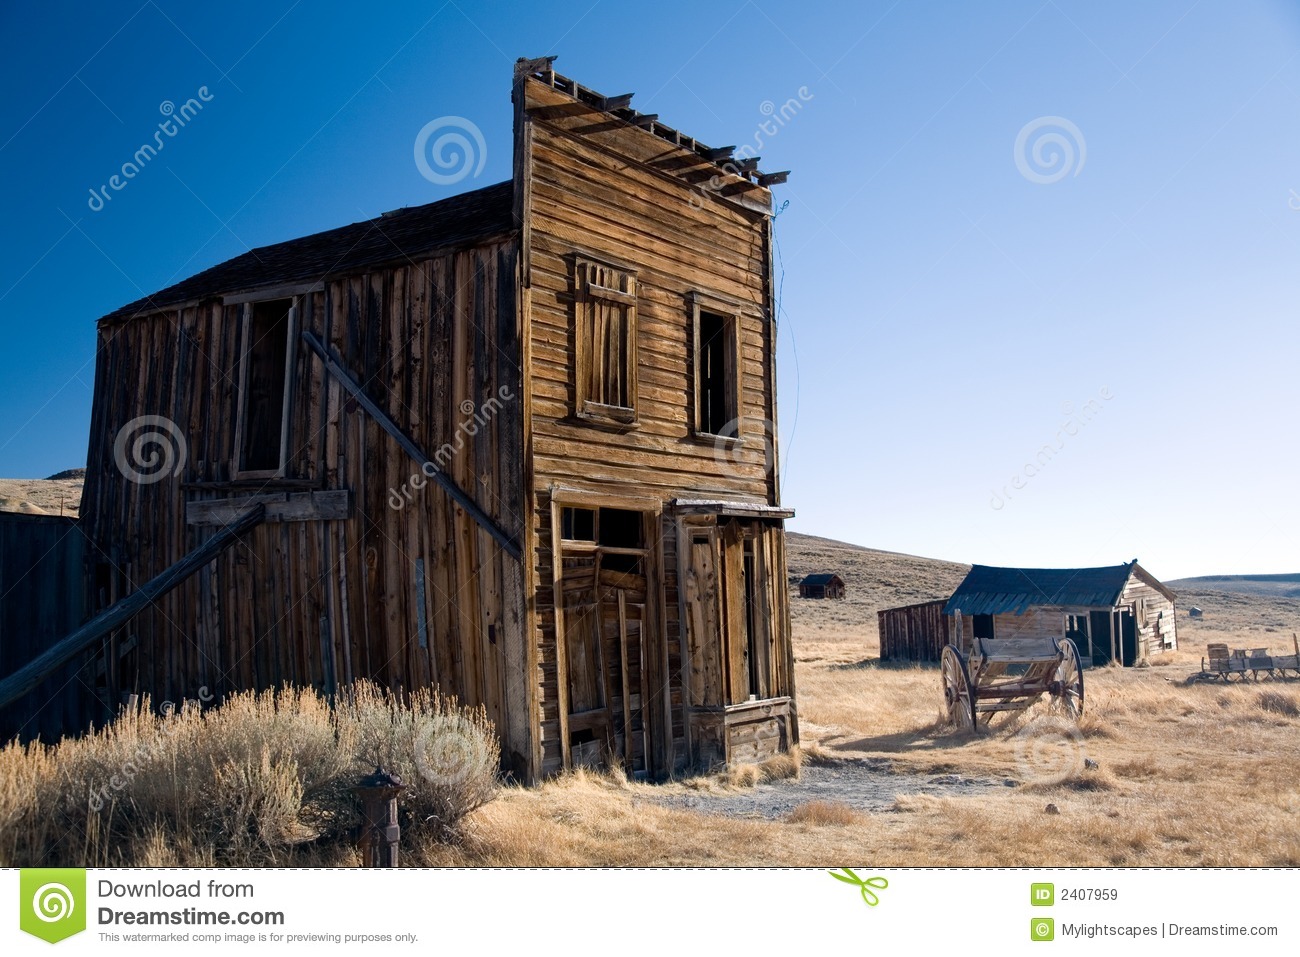 Ghost Town Royalty Free Stock Images.